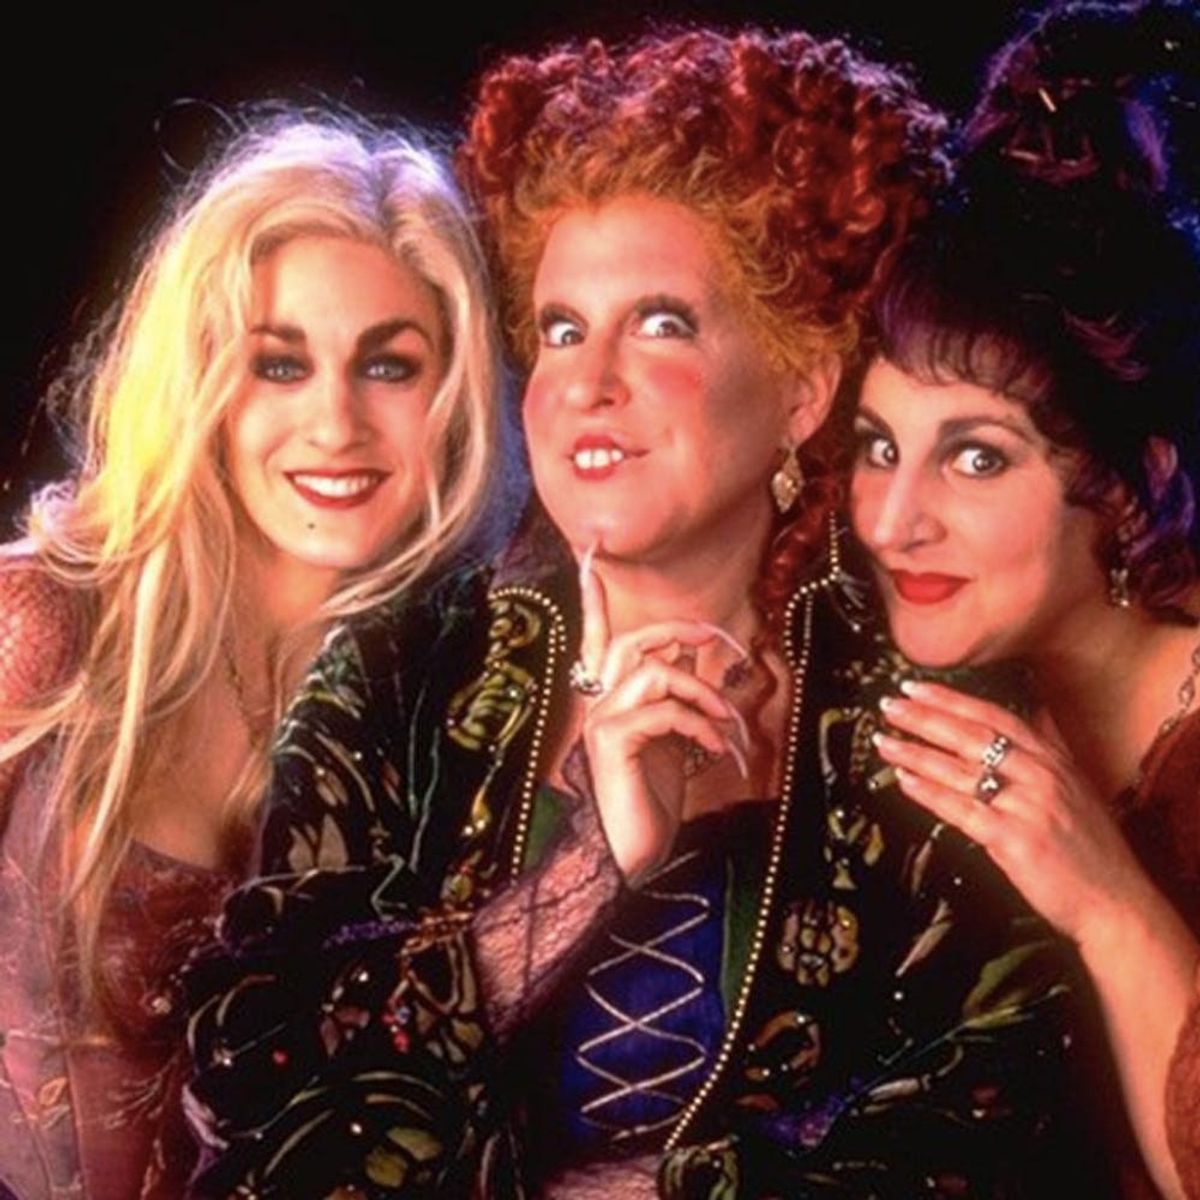 Disney’s New ‘Hocus Pocus’-Themed Merch Line Will Bewitch You